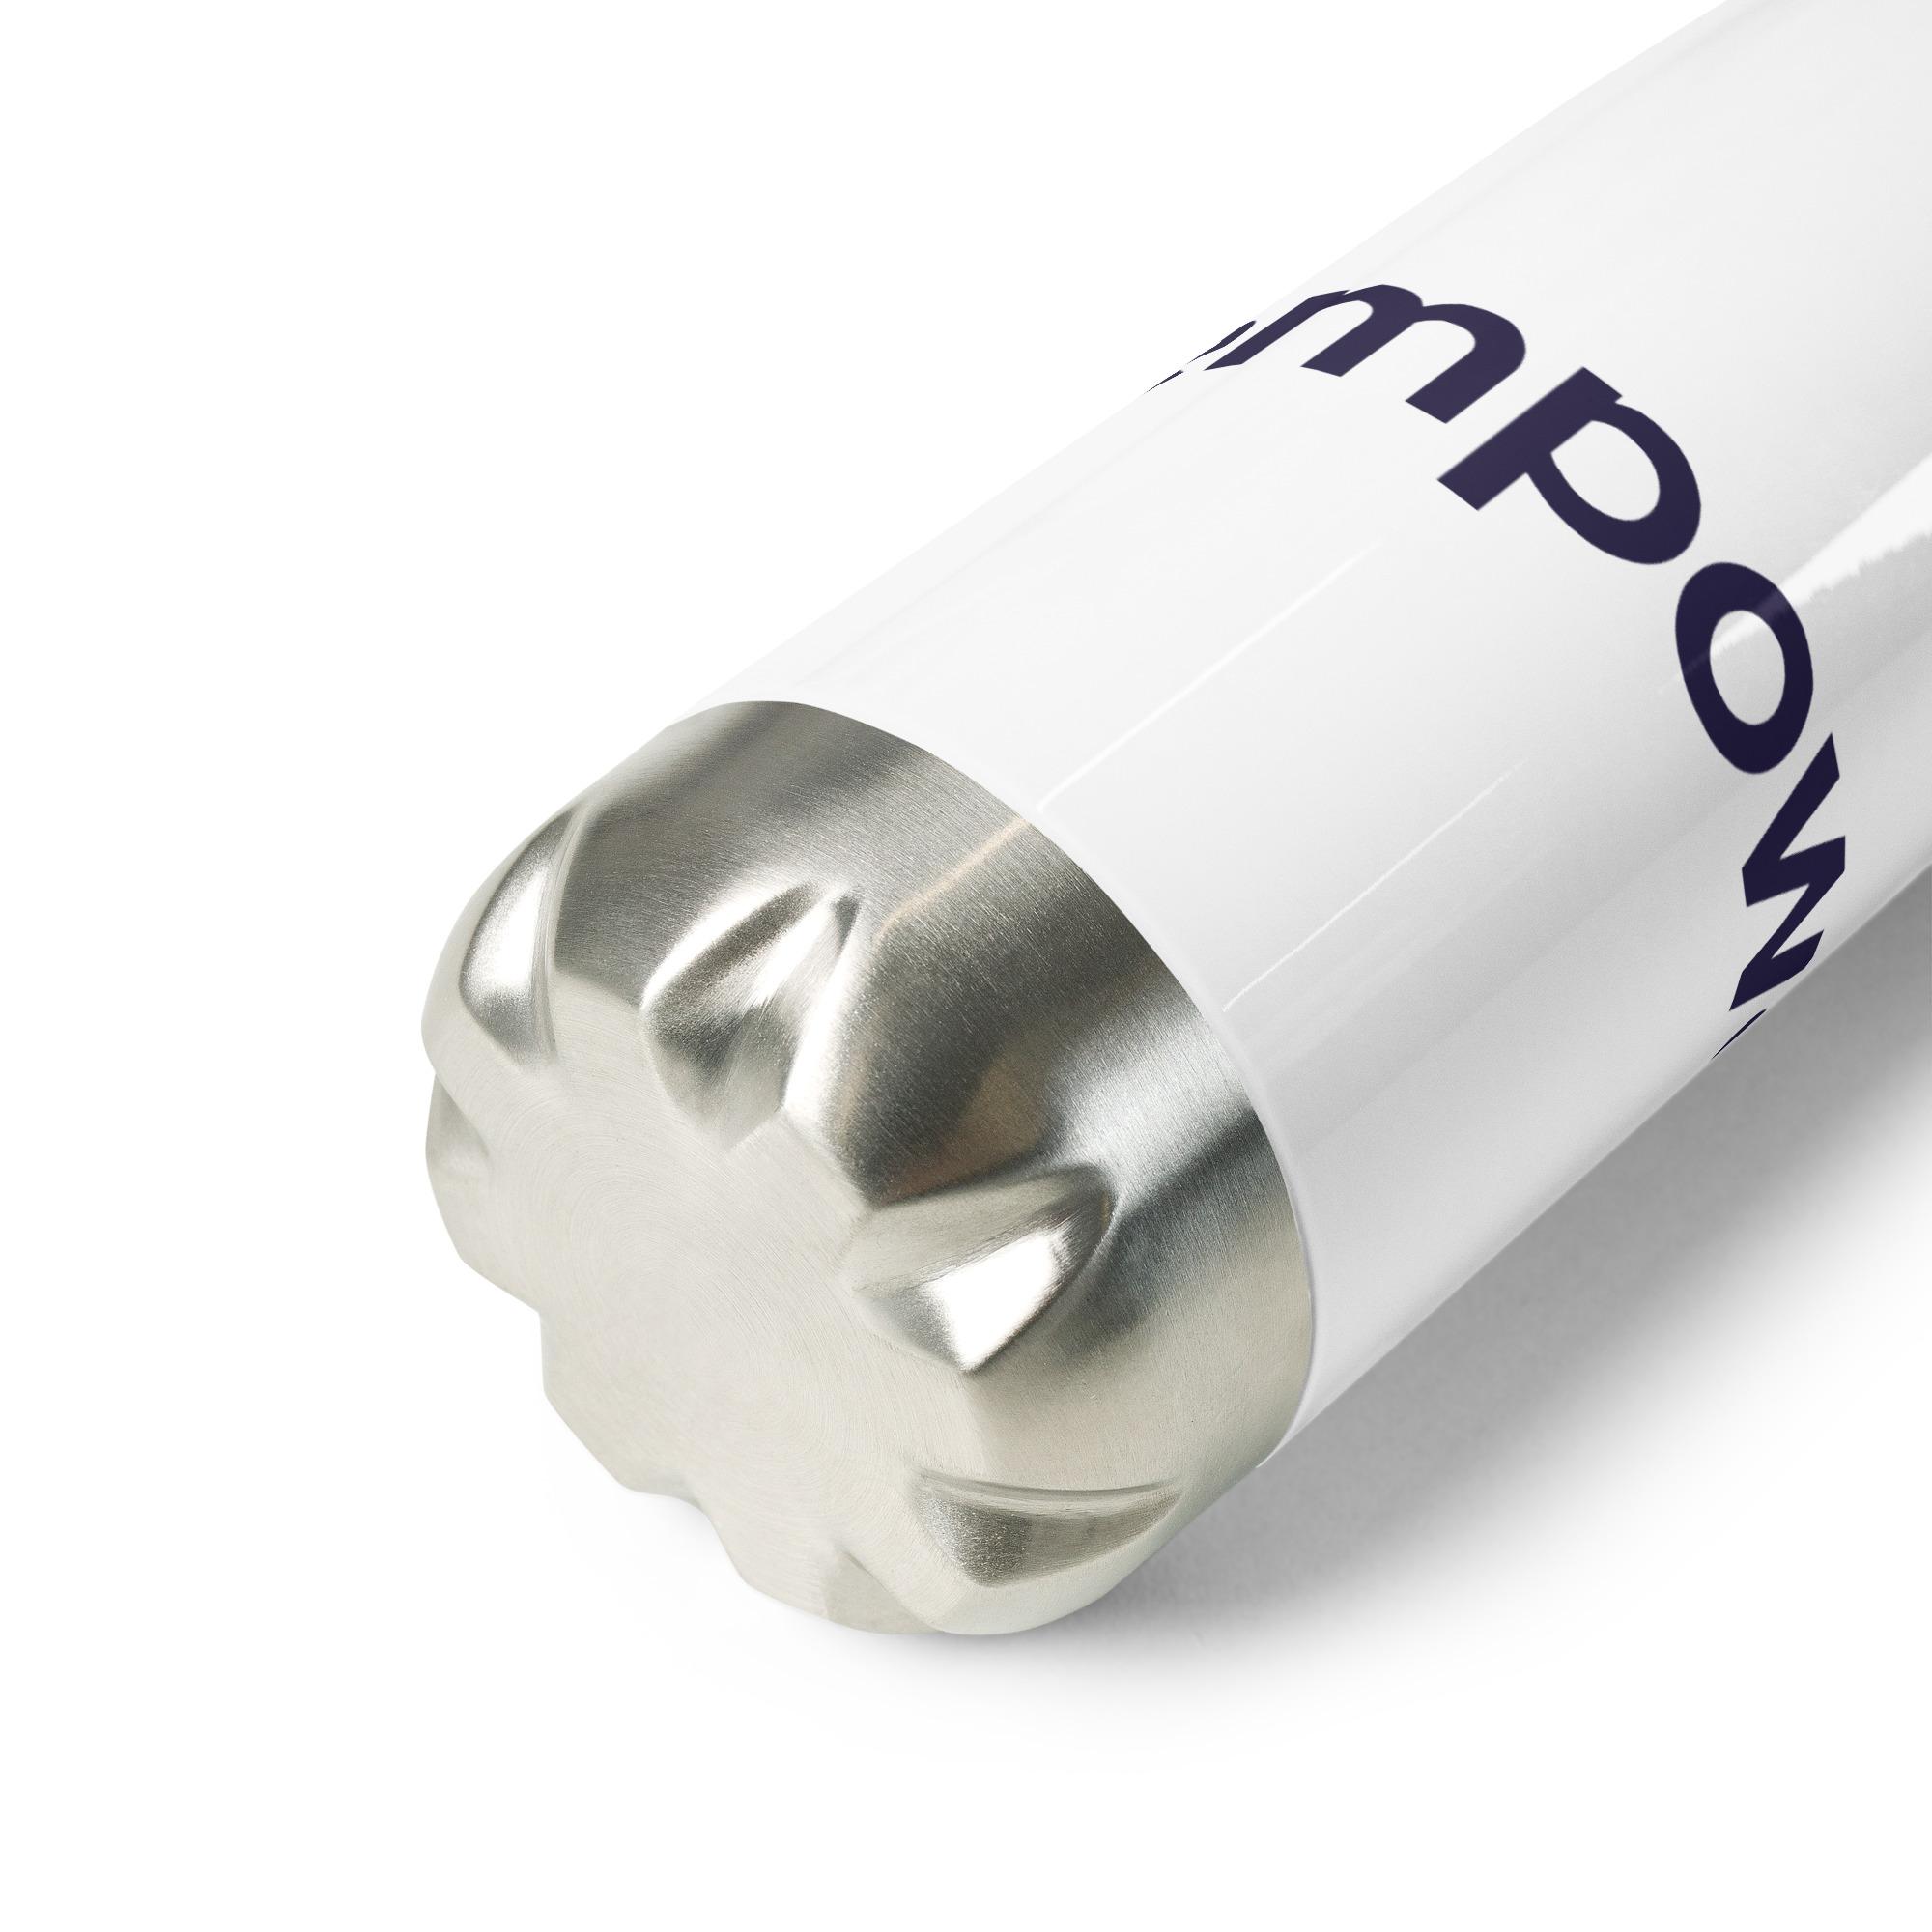 Product Empowered Systems Branded Stainless Steel Water Bottle - Empowered Systems Brand Store image